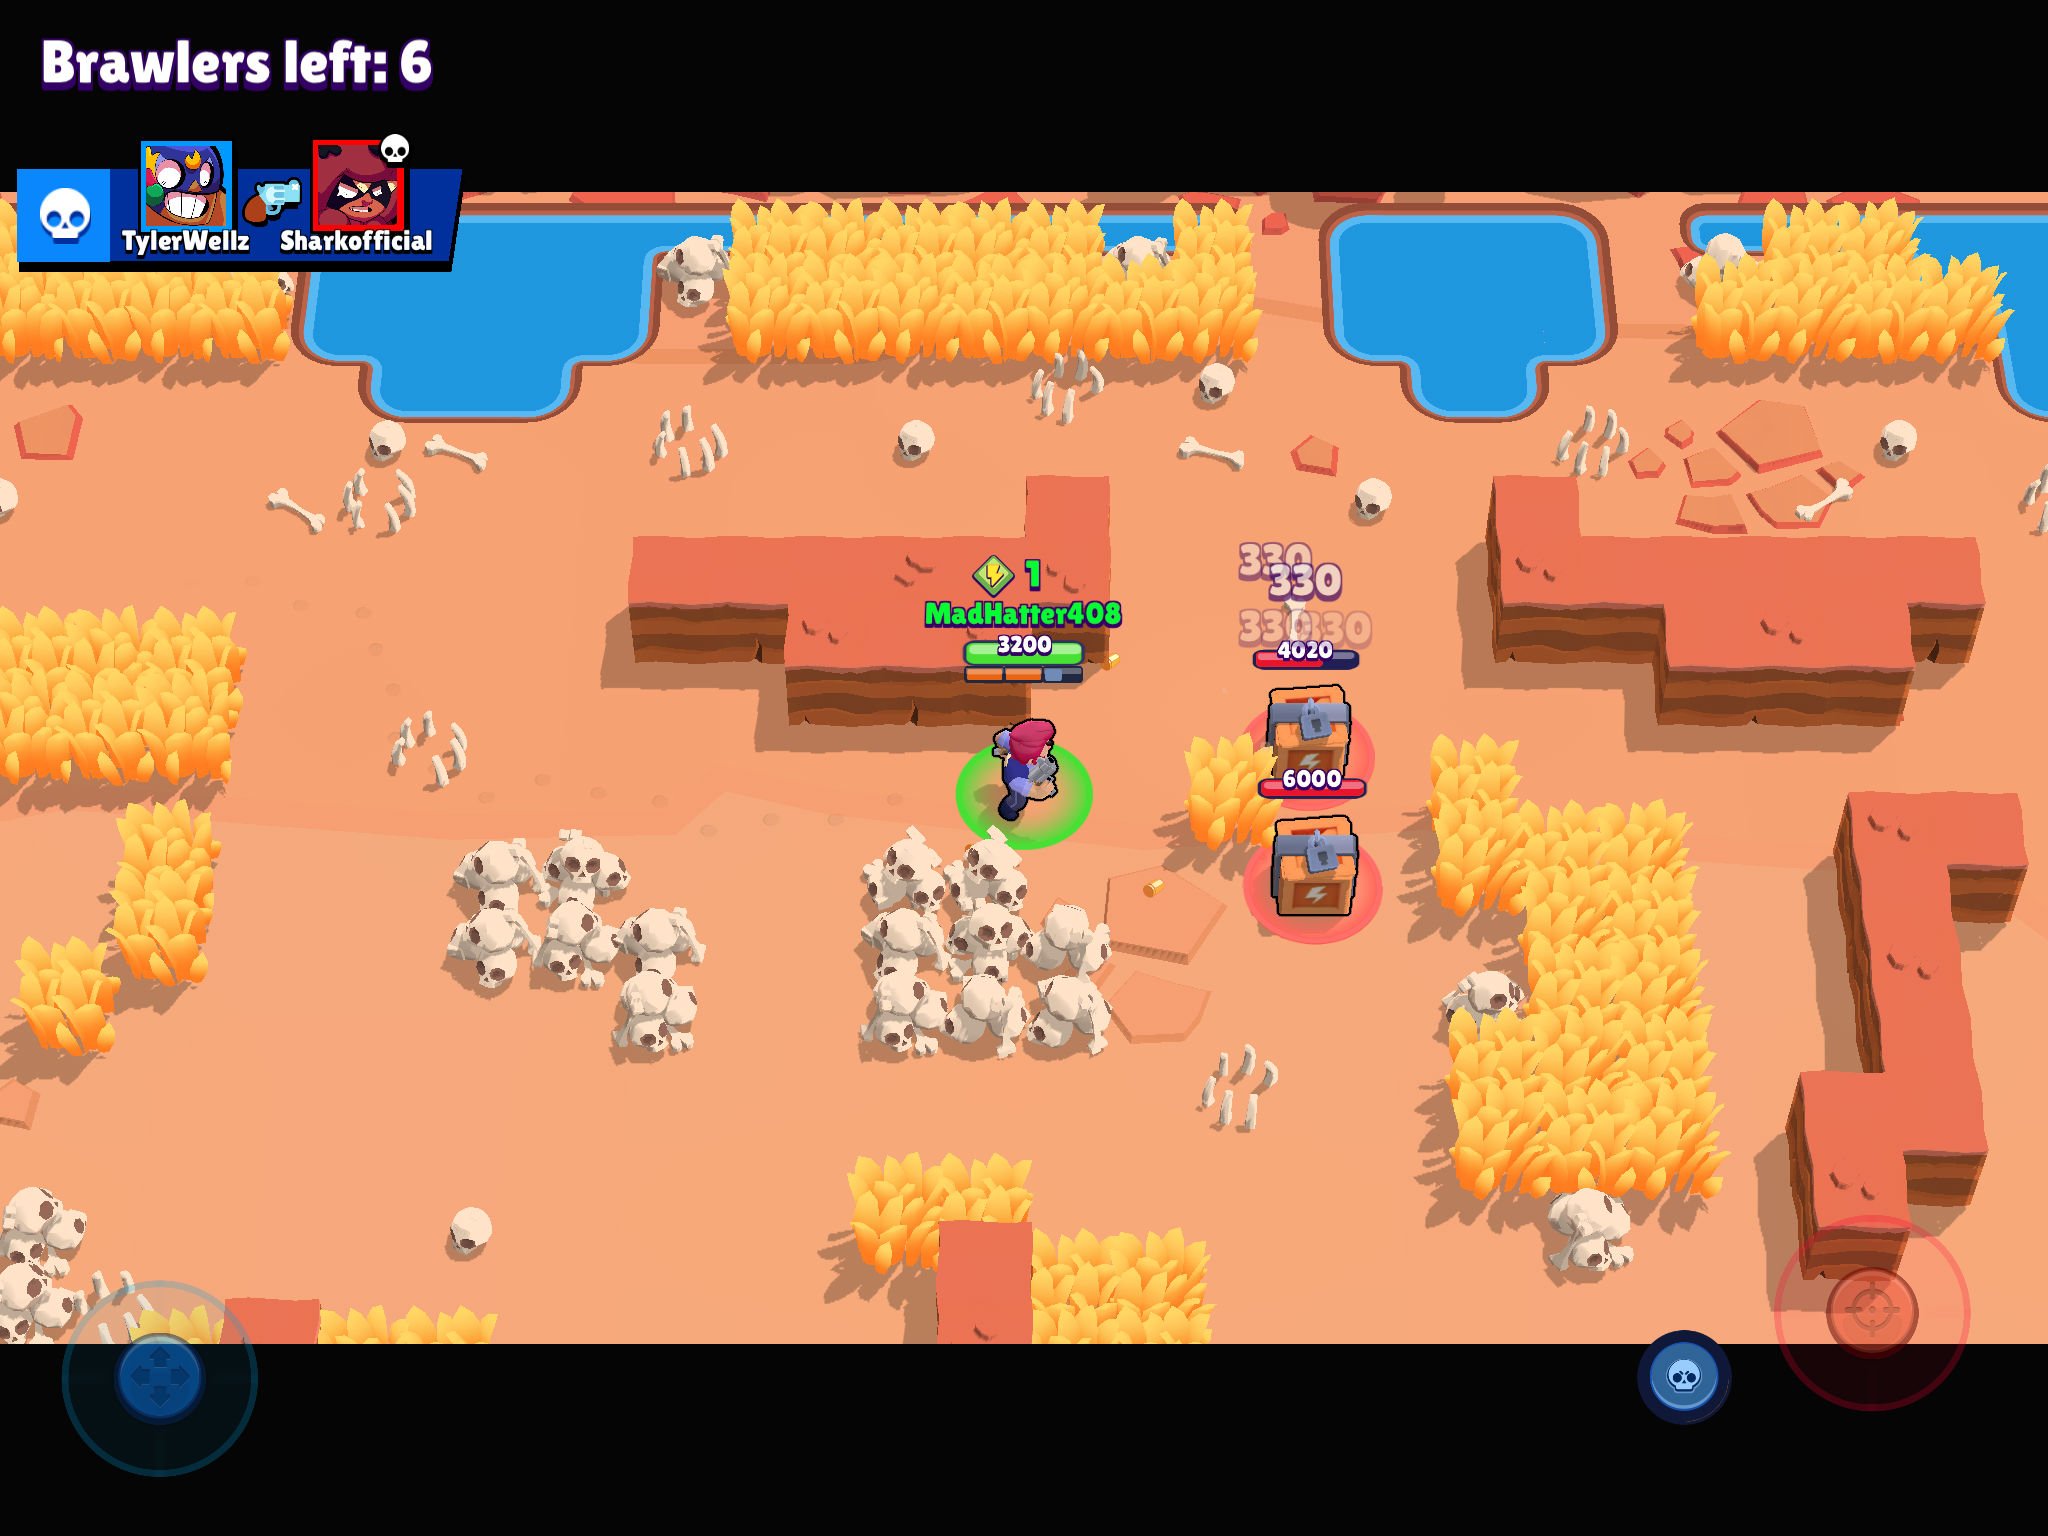 Brawl Stars Battle Royale Guide Everything You Need To Know About Showdown Mode Toucharcade - fond brawl stars showdown